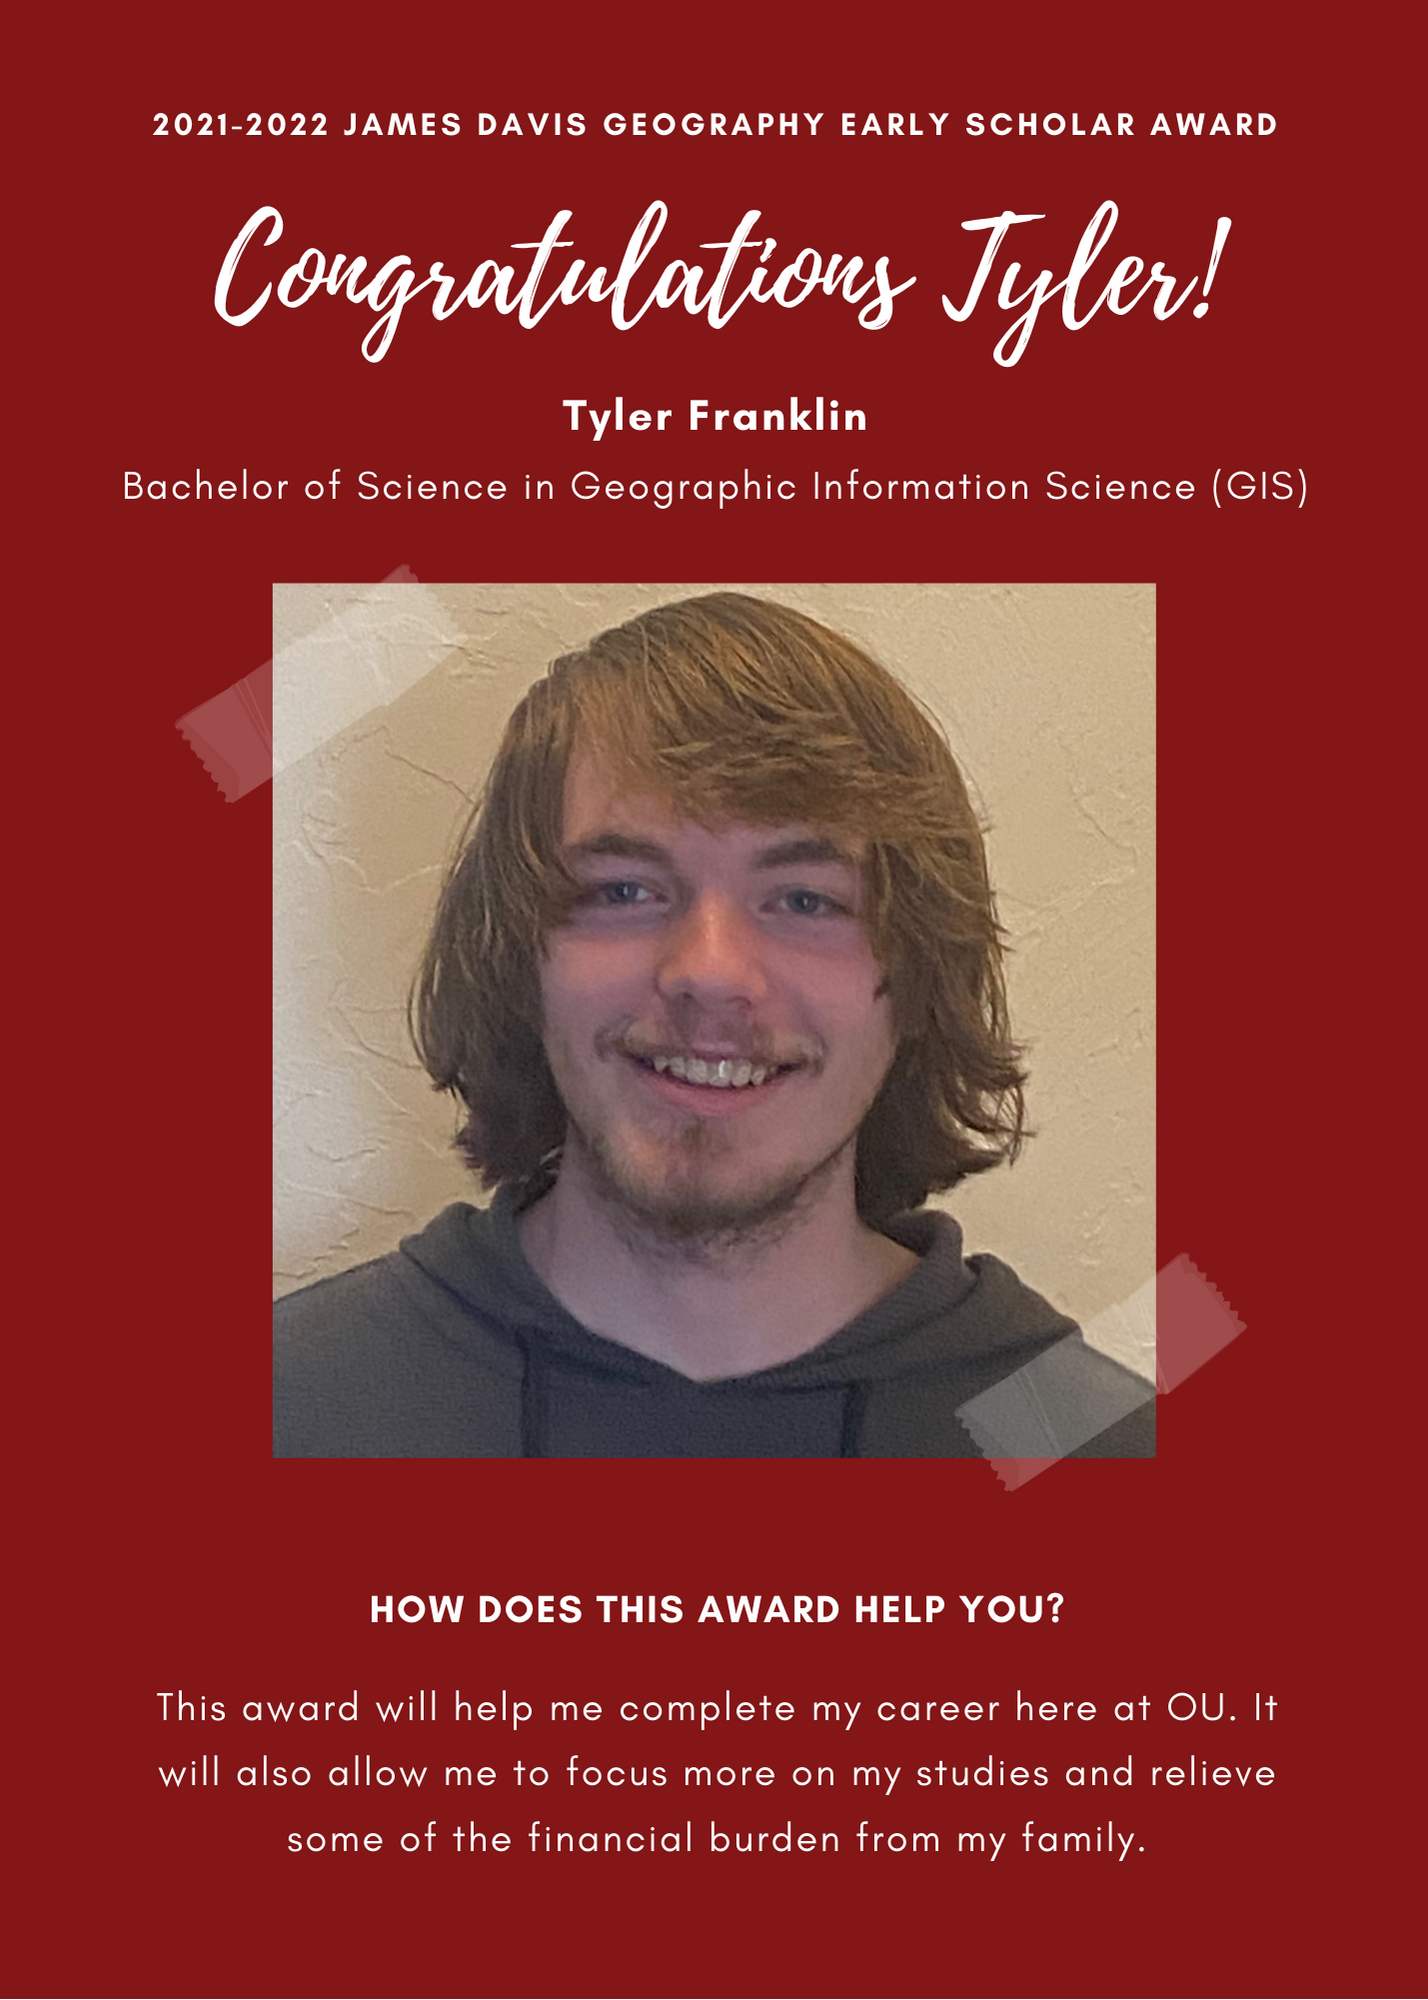 2021 -2022 A&GS James Davis Geography Early Scholar Award. Congratulations Tyler! Tyler Franklin Bachelor of Science in Geographic Information Science (GIS). How does this award help you? This Award will help me complete my career here at OU. It will also allow me to focus more on my studies and relieve some of the financial burden from my family.